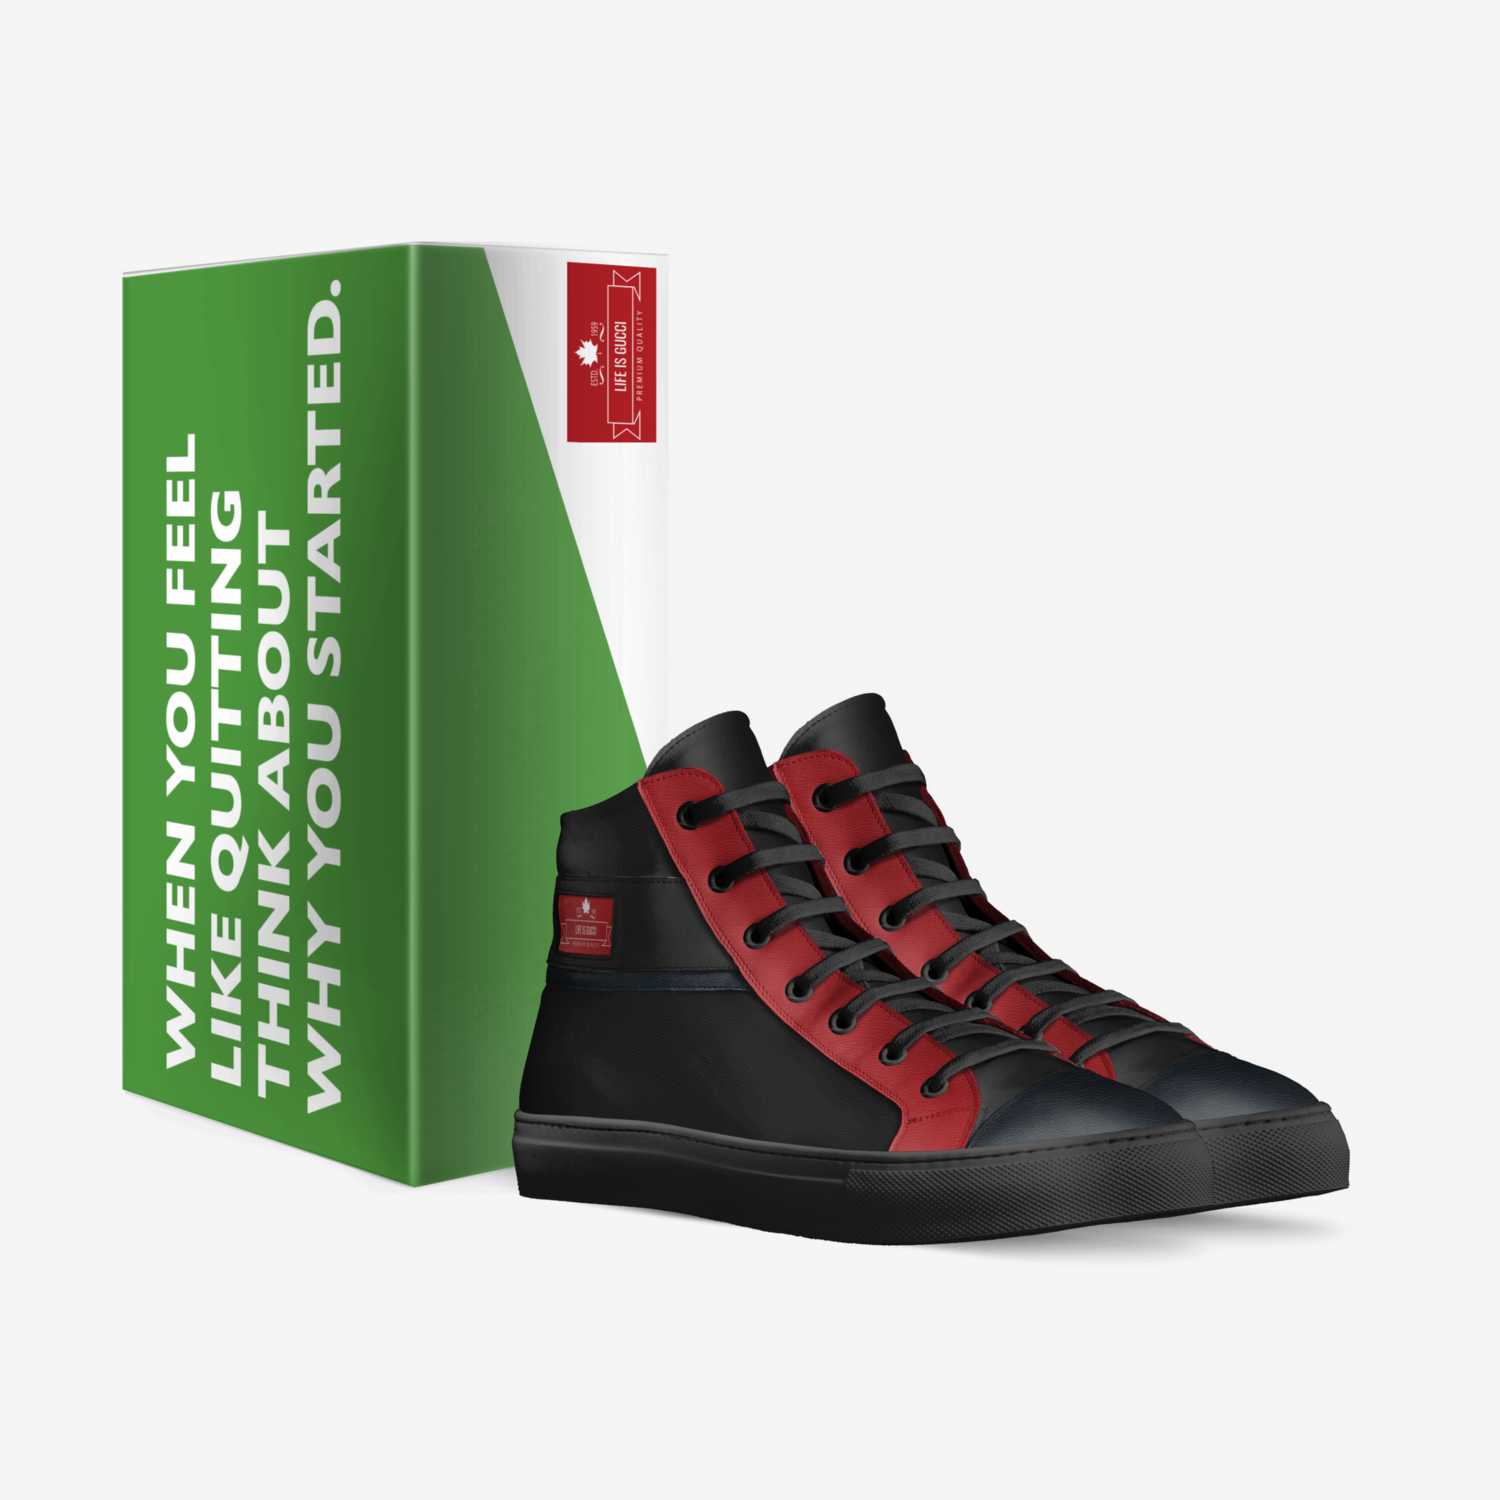 mmn custom made in Italy shoes by Nathan Shely | Box view